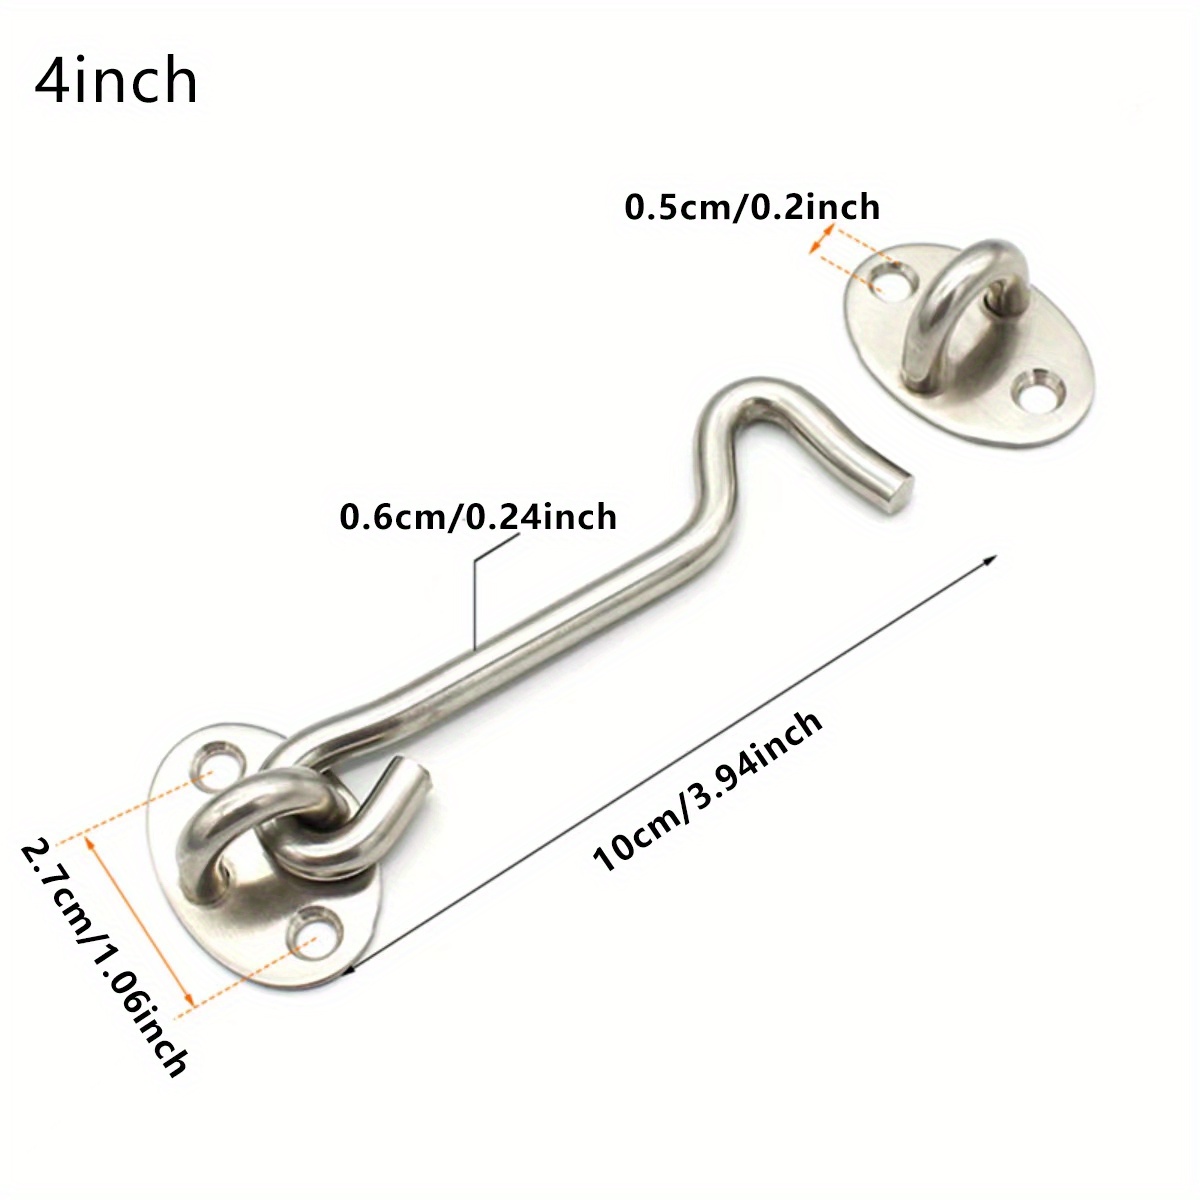  4 Inch Hook and Eye Latch,Black Cabin Hook,Stainless